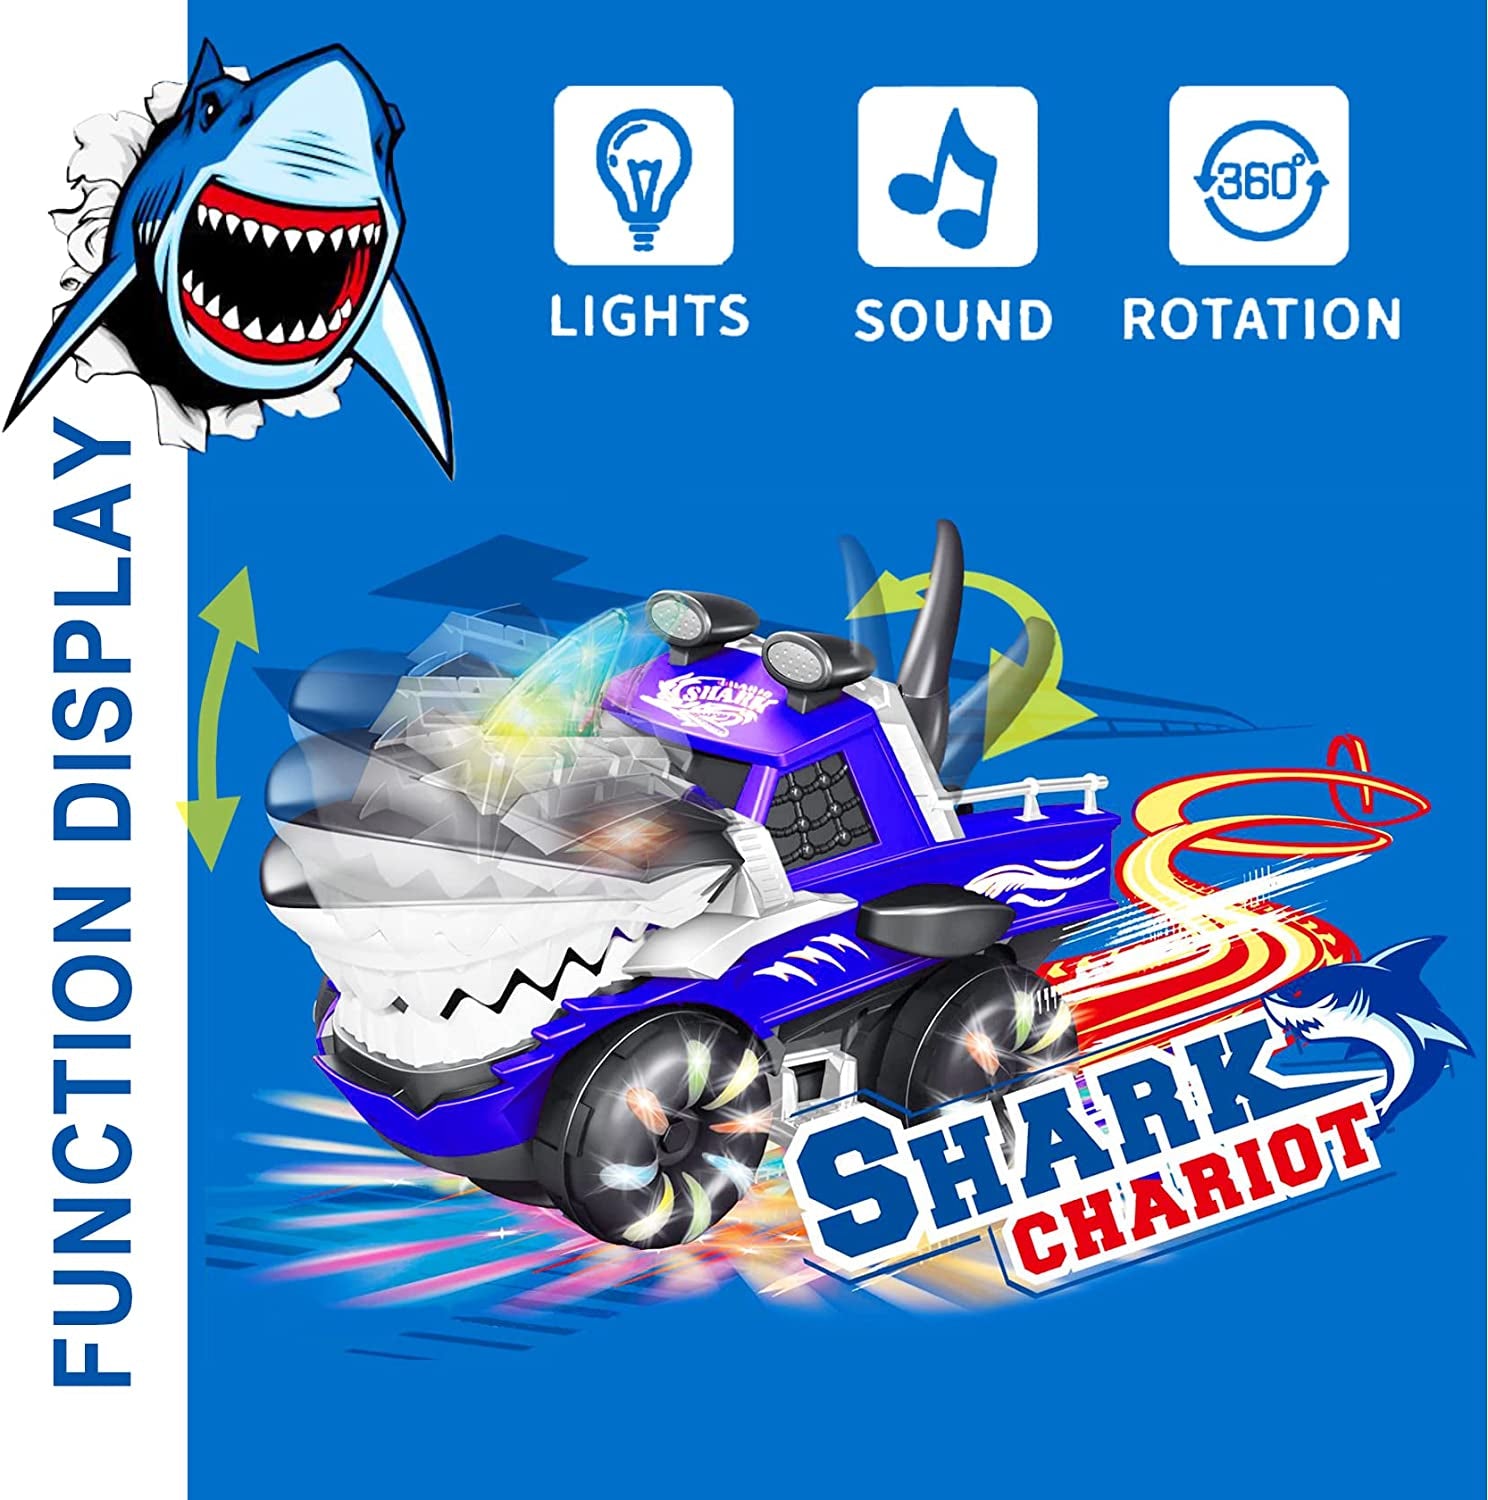 Toddler Monster Truck Toys, Shark Car Toys for Kids, Chomps and Shakes Megalodon Play Vehicles, Great Birthday & Christmas Gift for Boys and Girls(Blue)